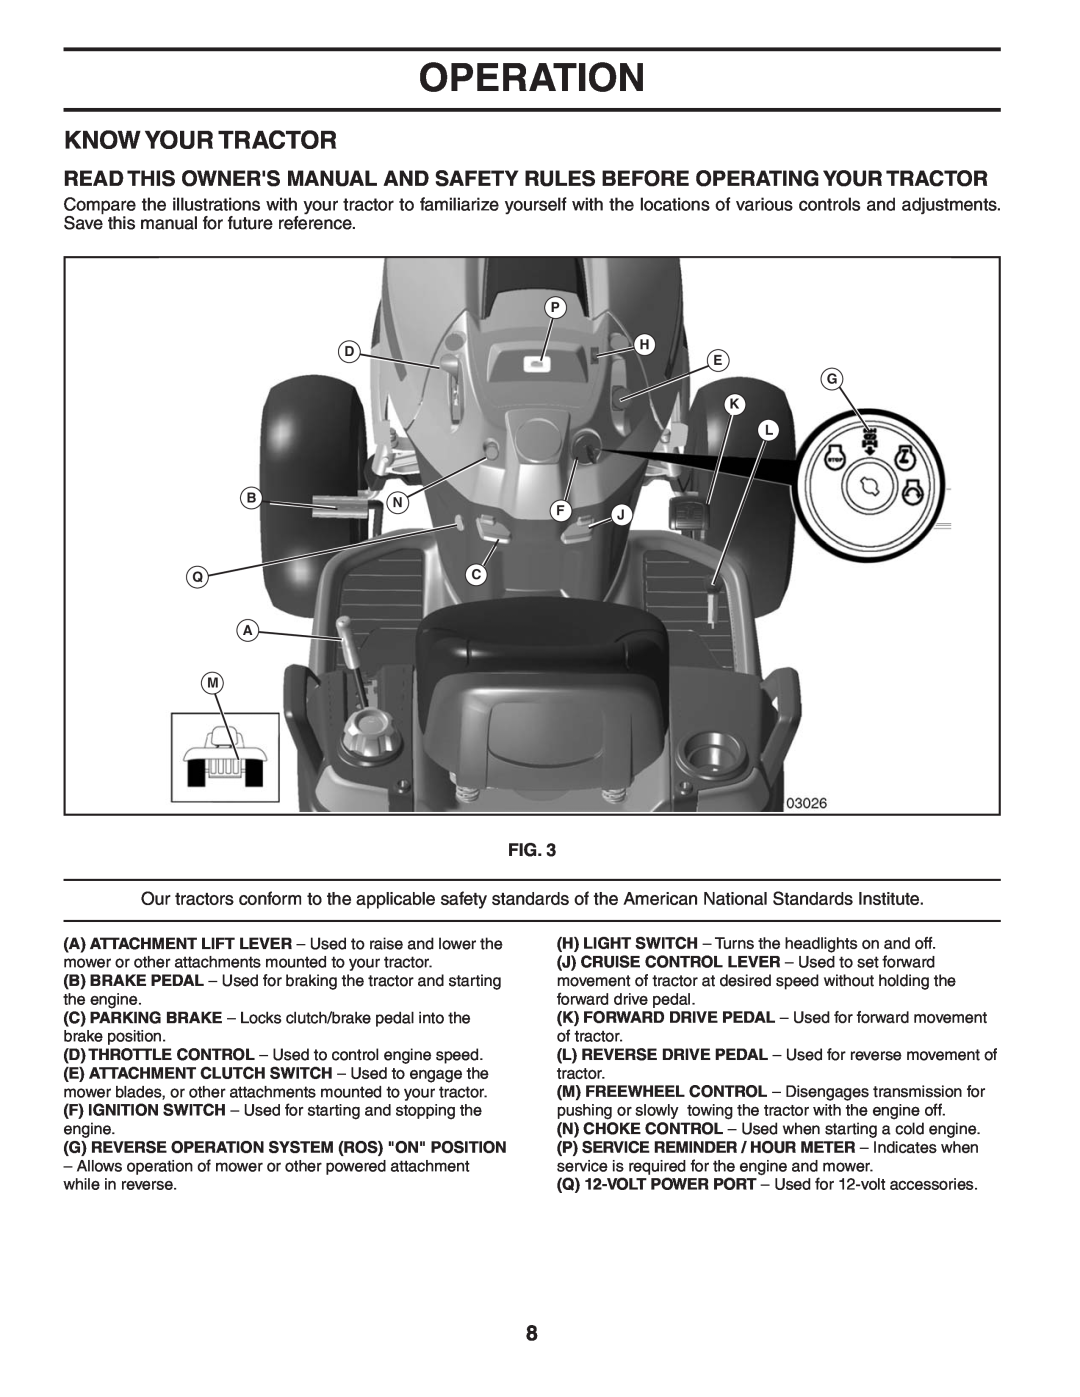 Husqvarna YTH2448T owner manual Know Your Tractor, G Reverse Operation System Ros On Position 